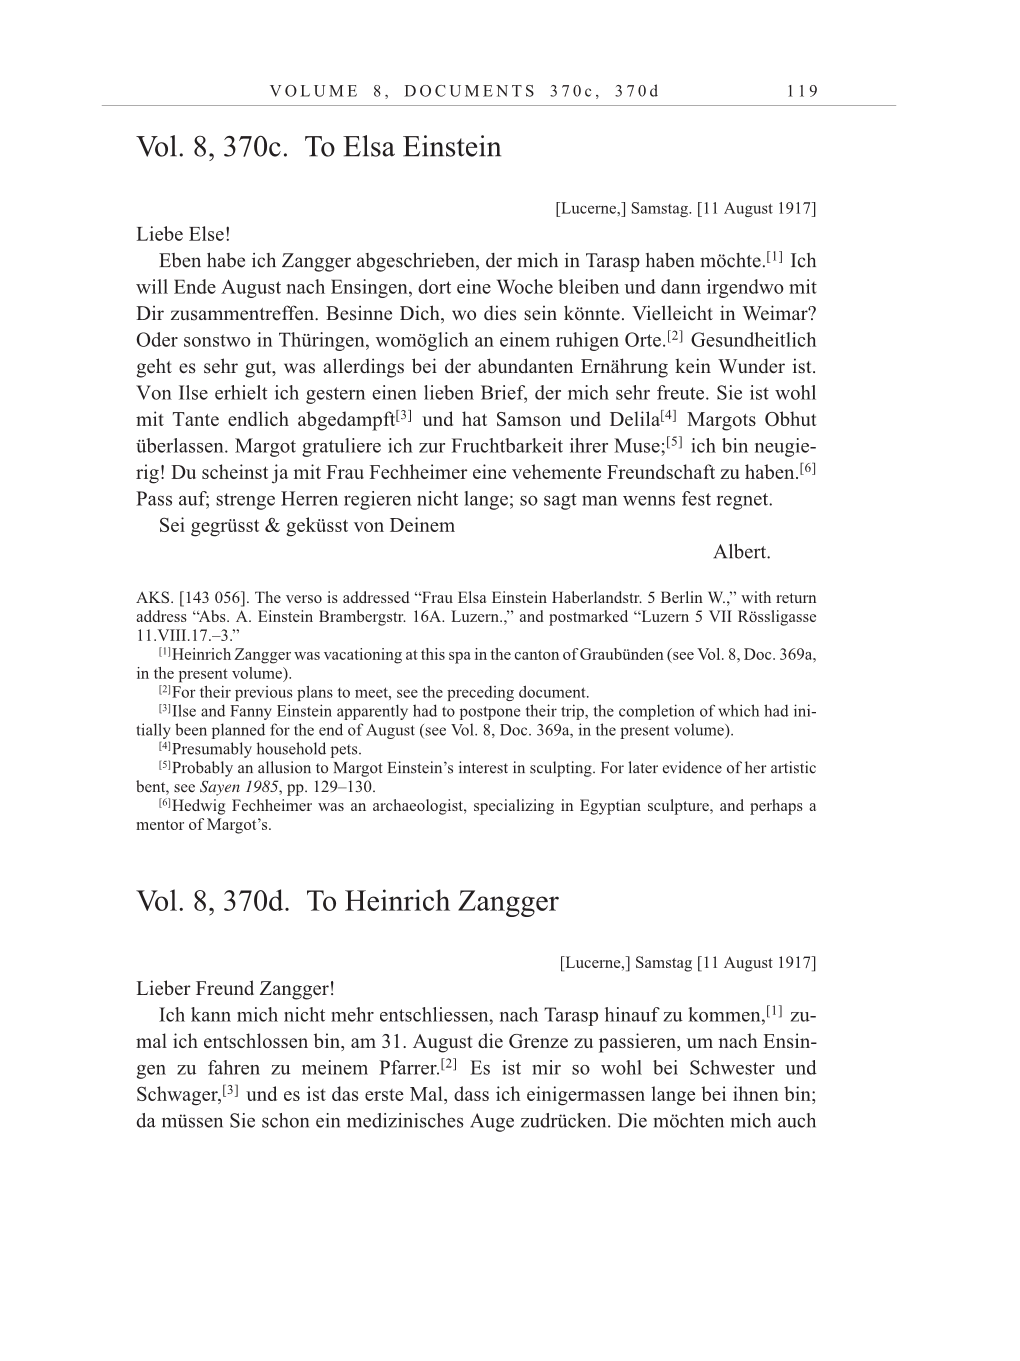 Volume 10: The Berlin Years: Correspondence May-December 1920 / Supplementary Correspondence 1909-1920 page 119